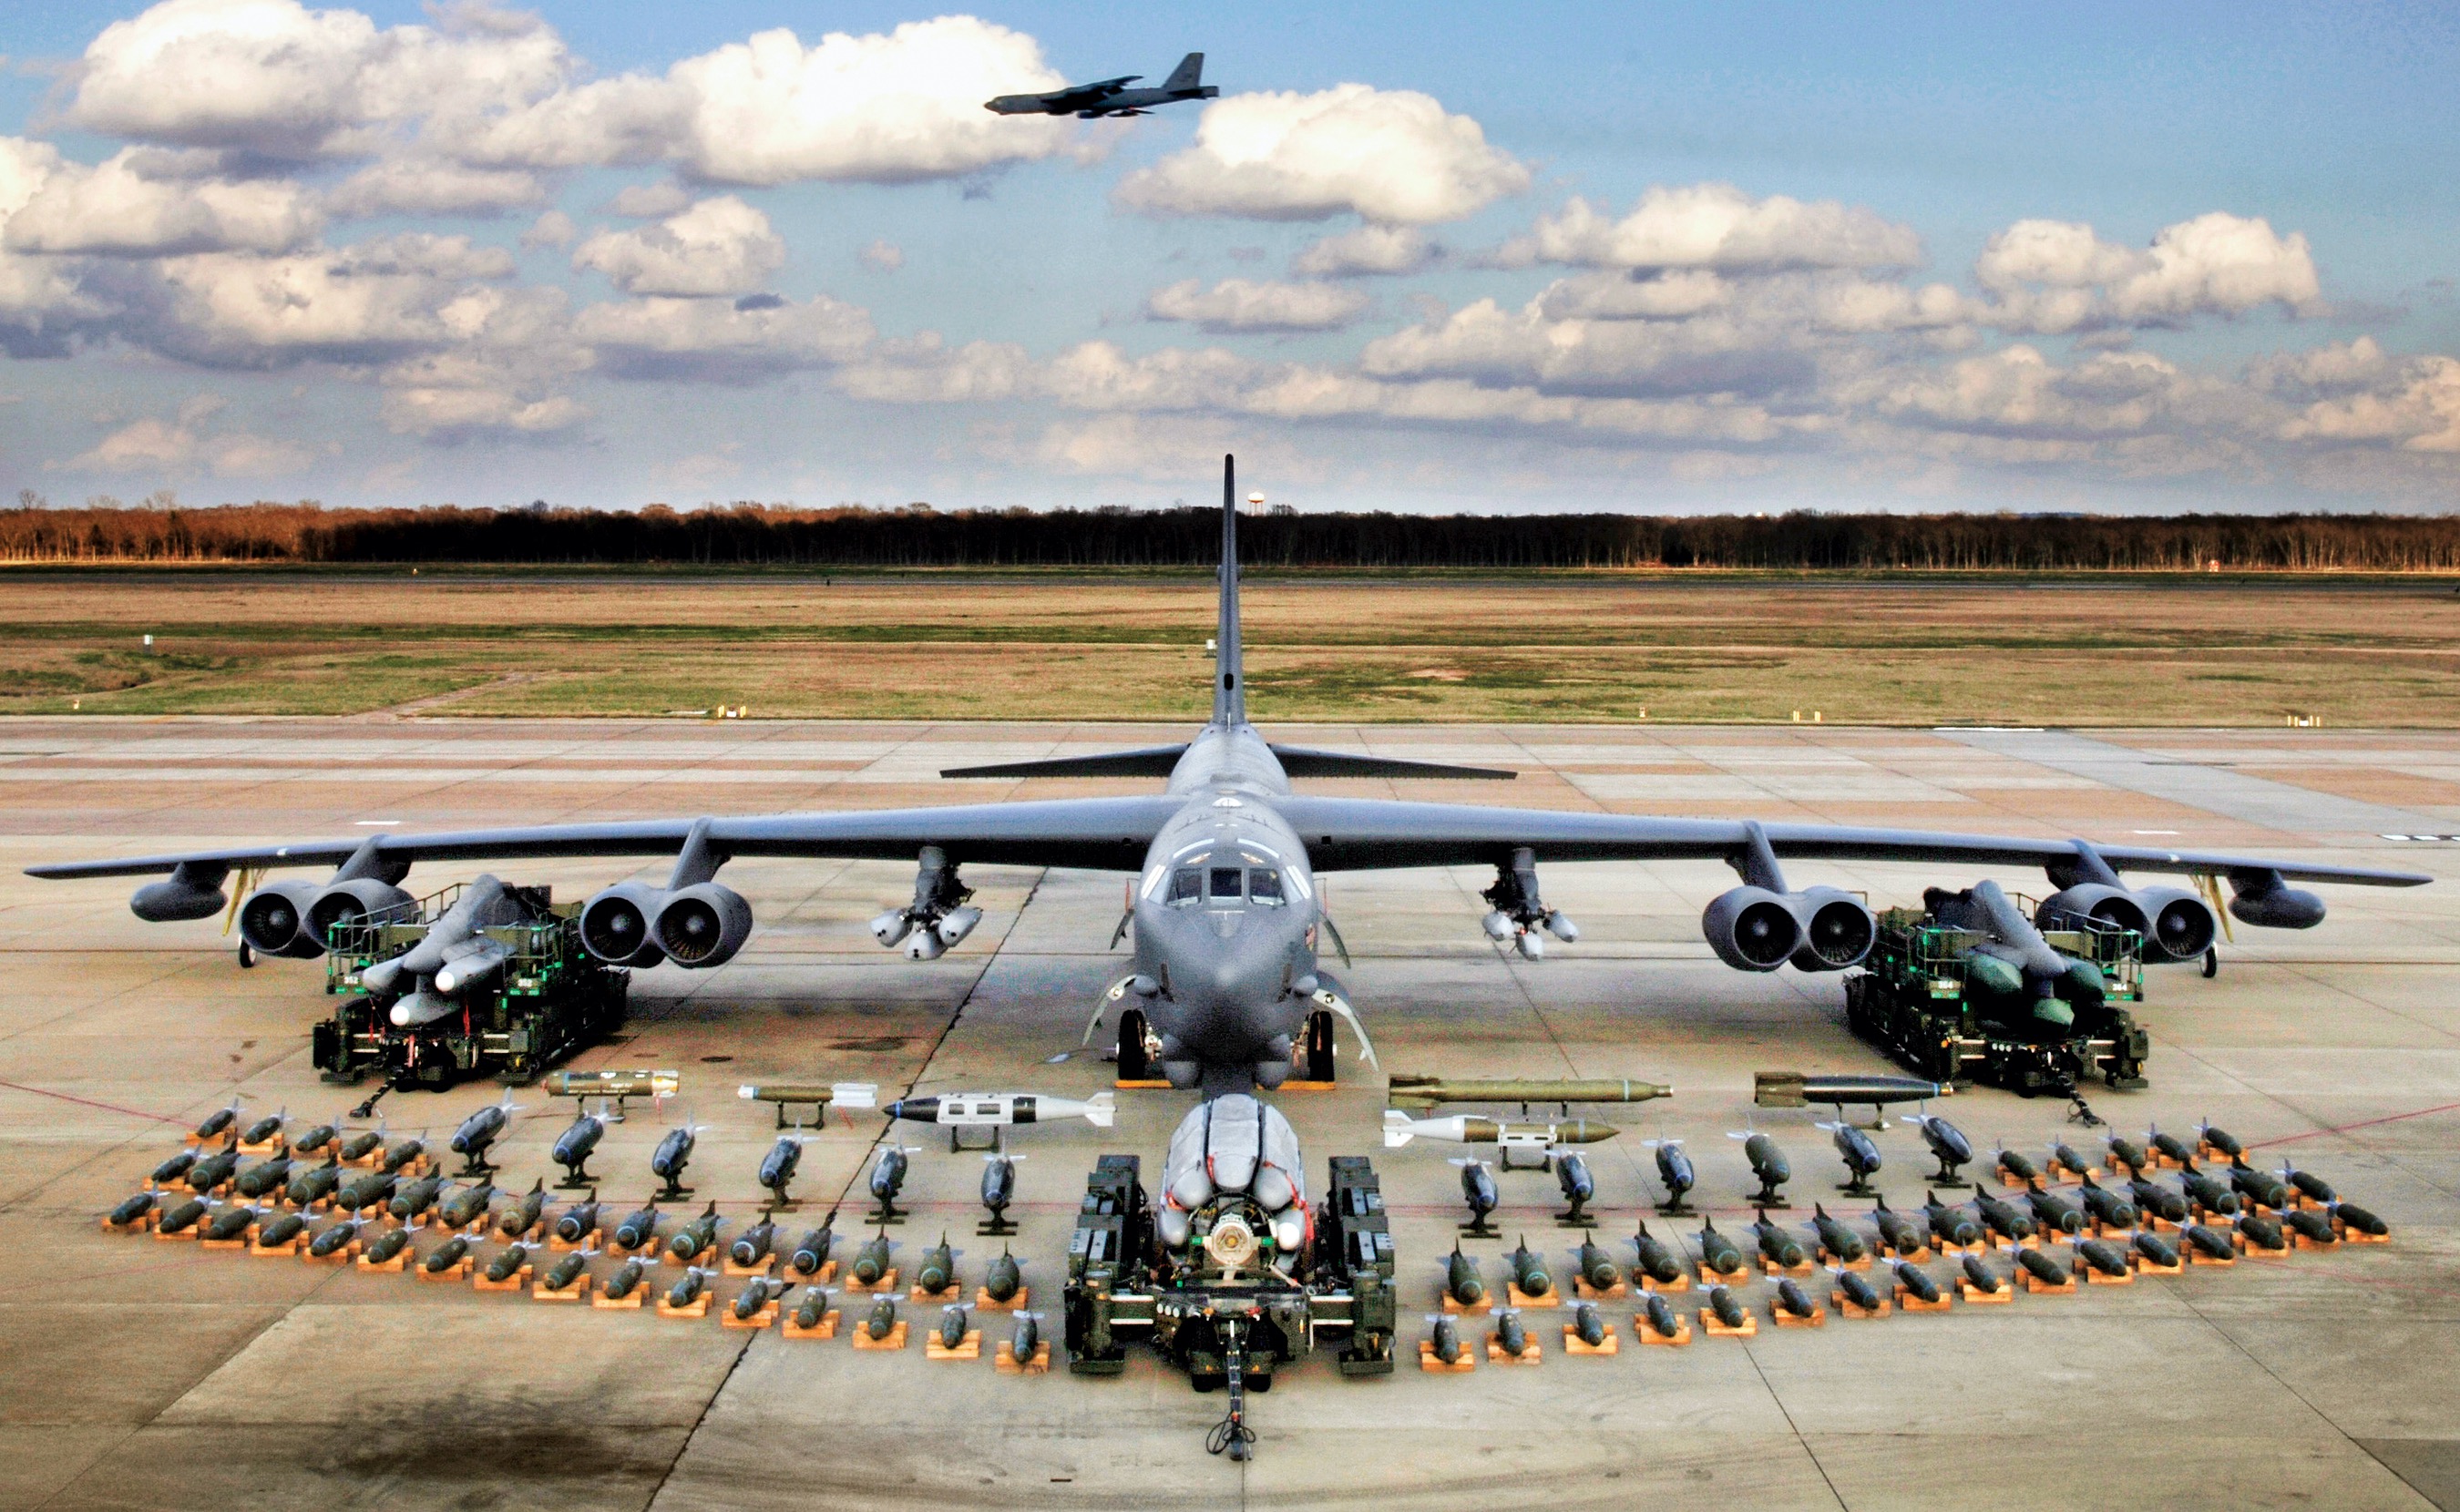 Boeing B-52H static display with weapons, Barksdale AFB 2006. A second B-52H can be seen in flight in the background